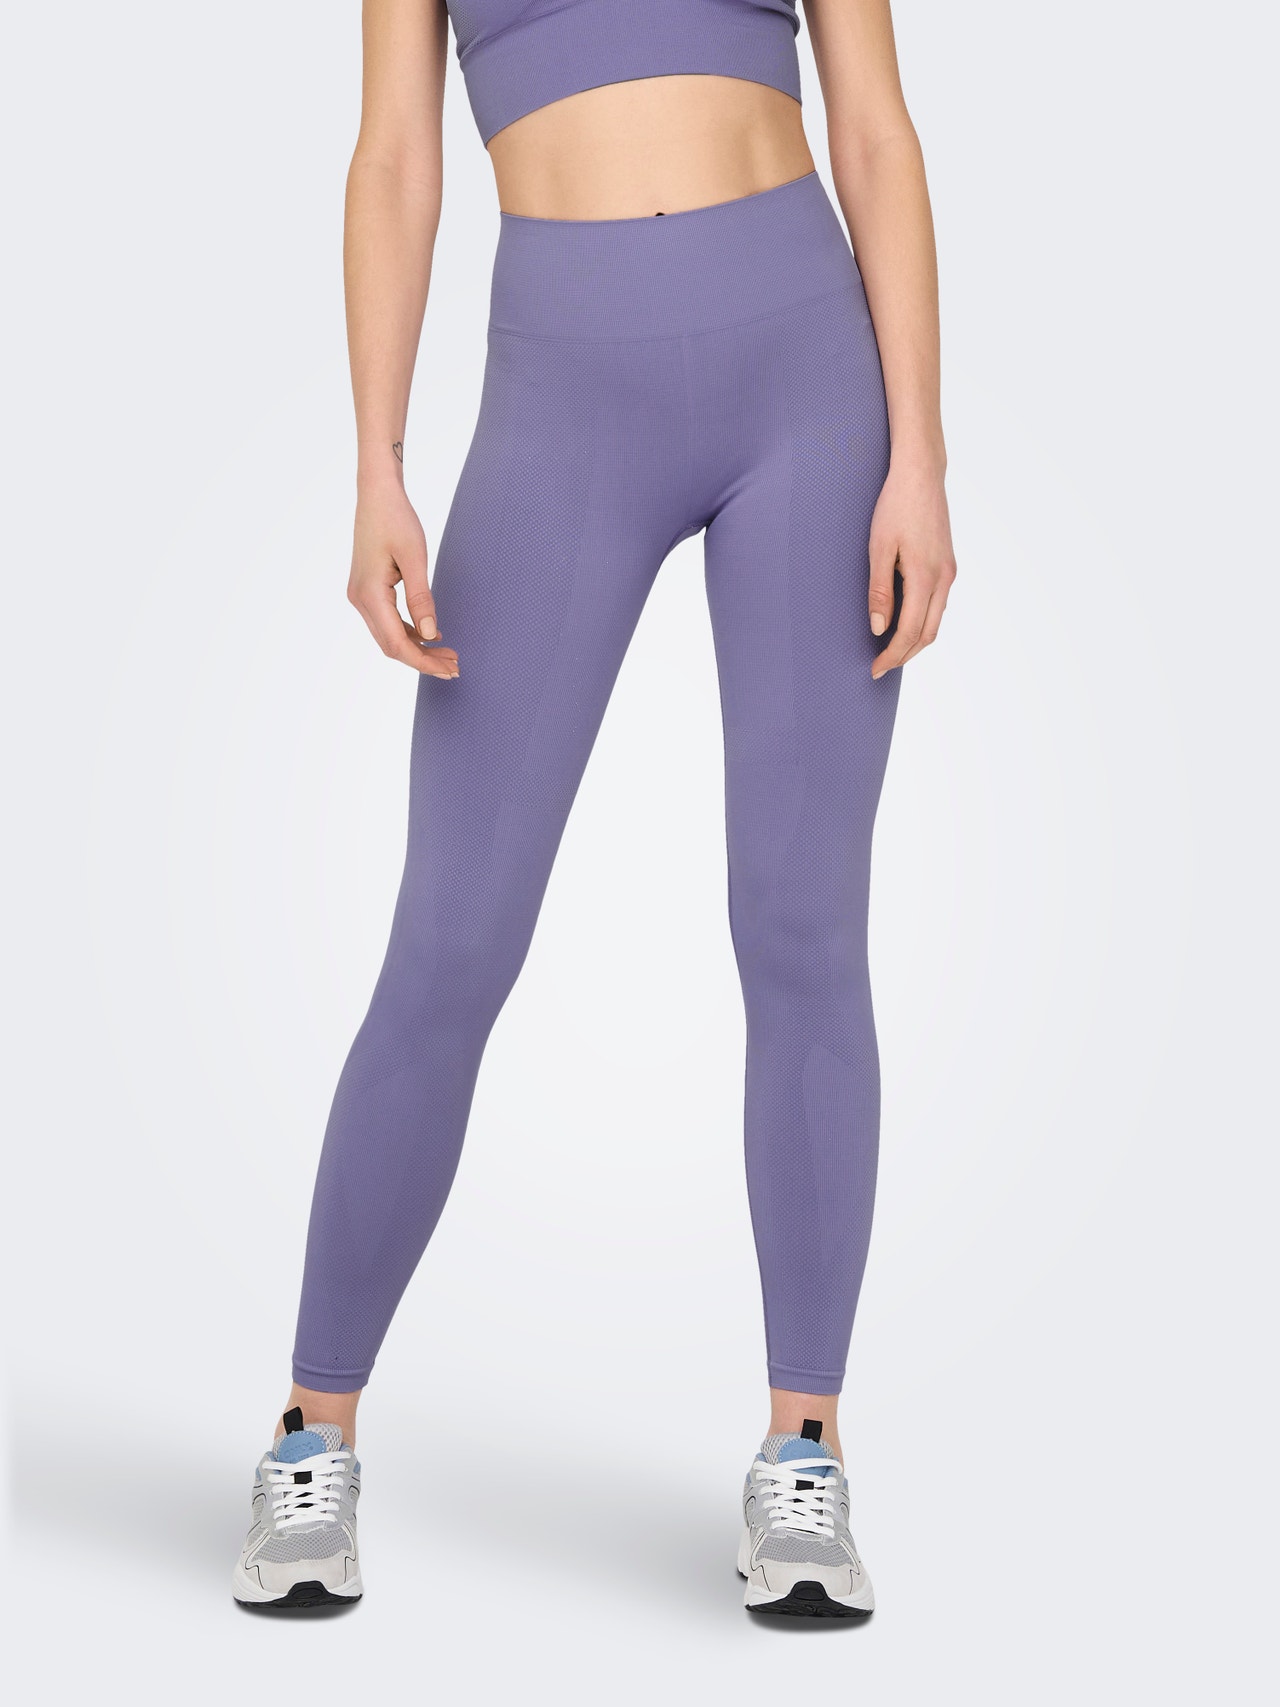 Slim Fit High waist Leggings with 20 discount!